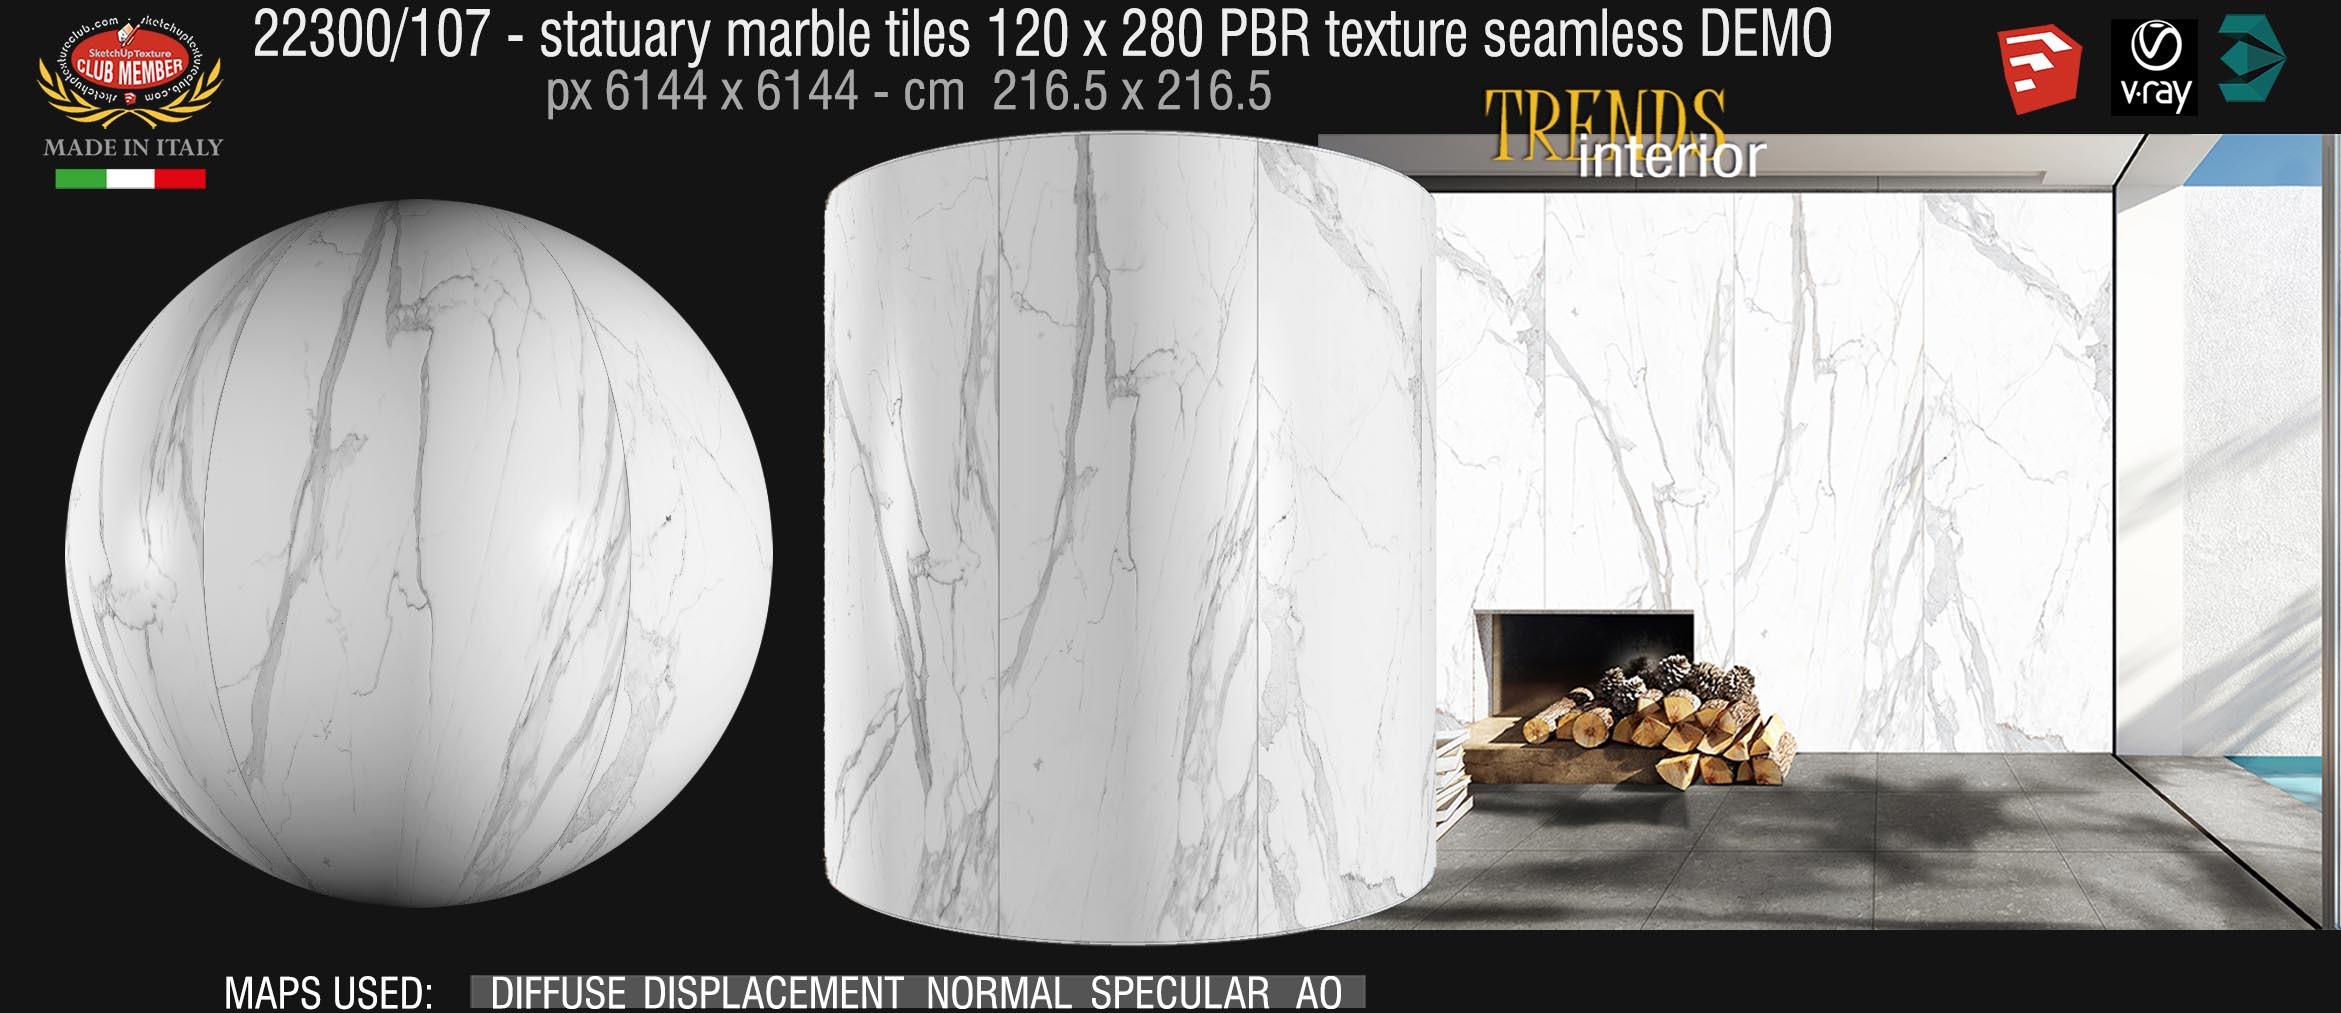 22300_107 Statuary marble tiles 120 x 280 PBR texture seamless DEMO